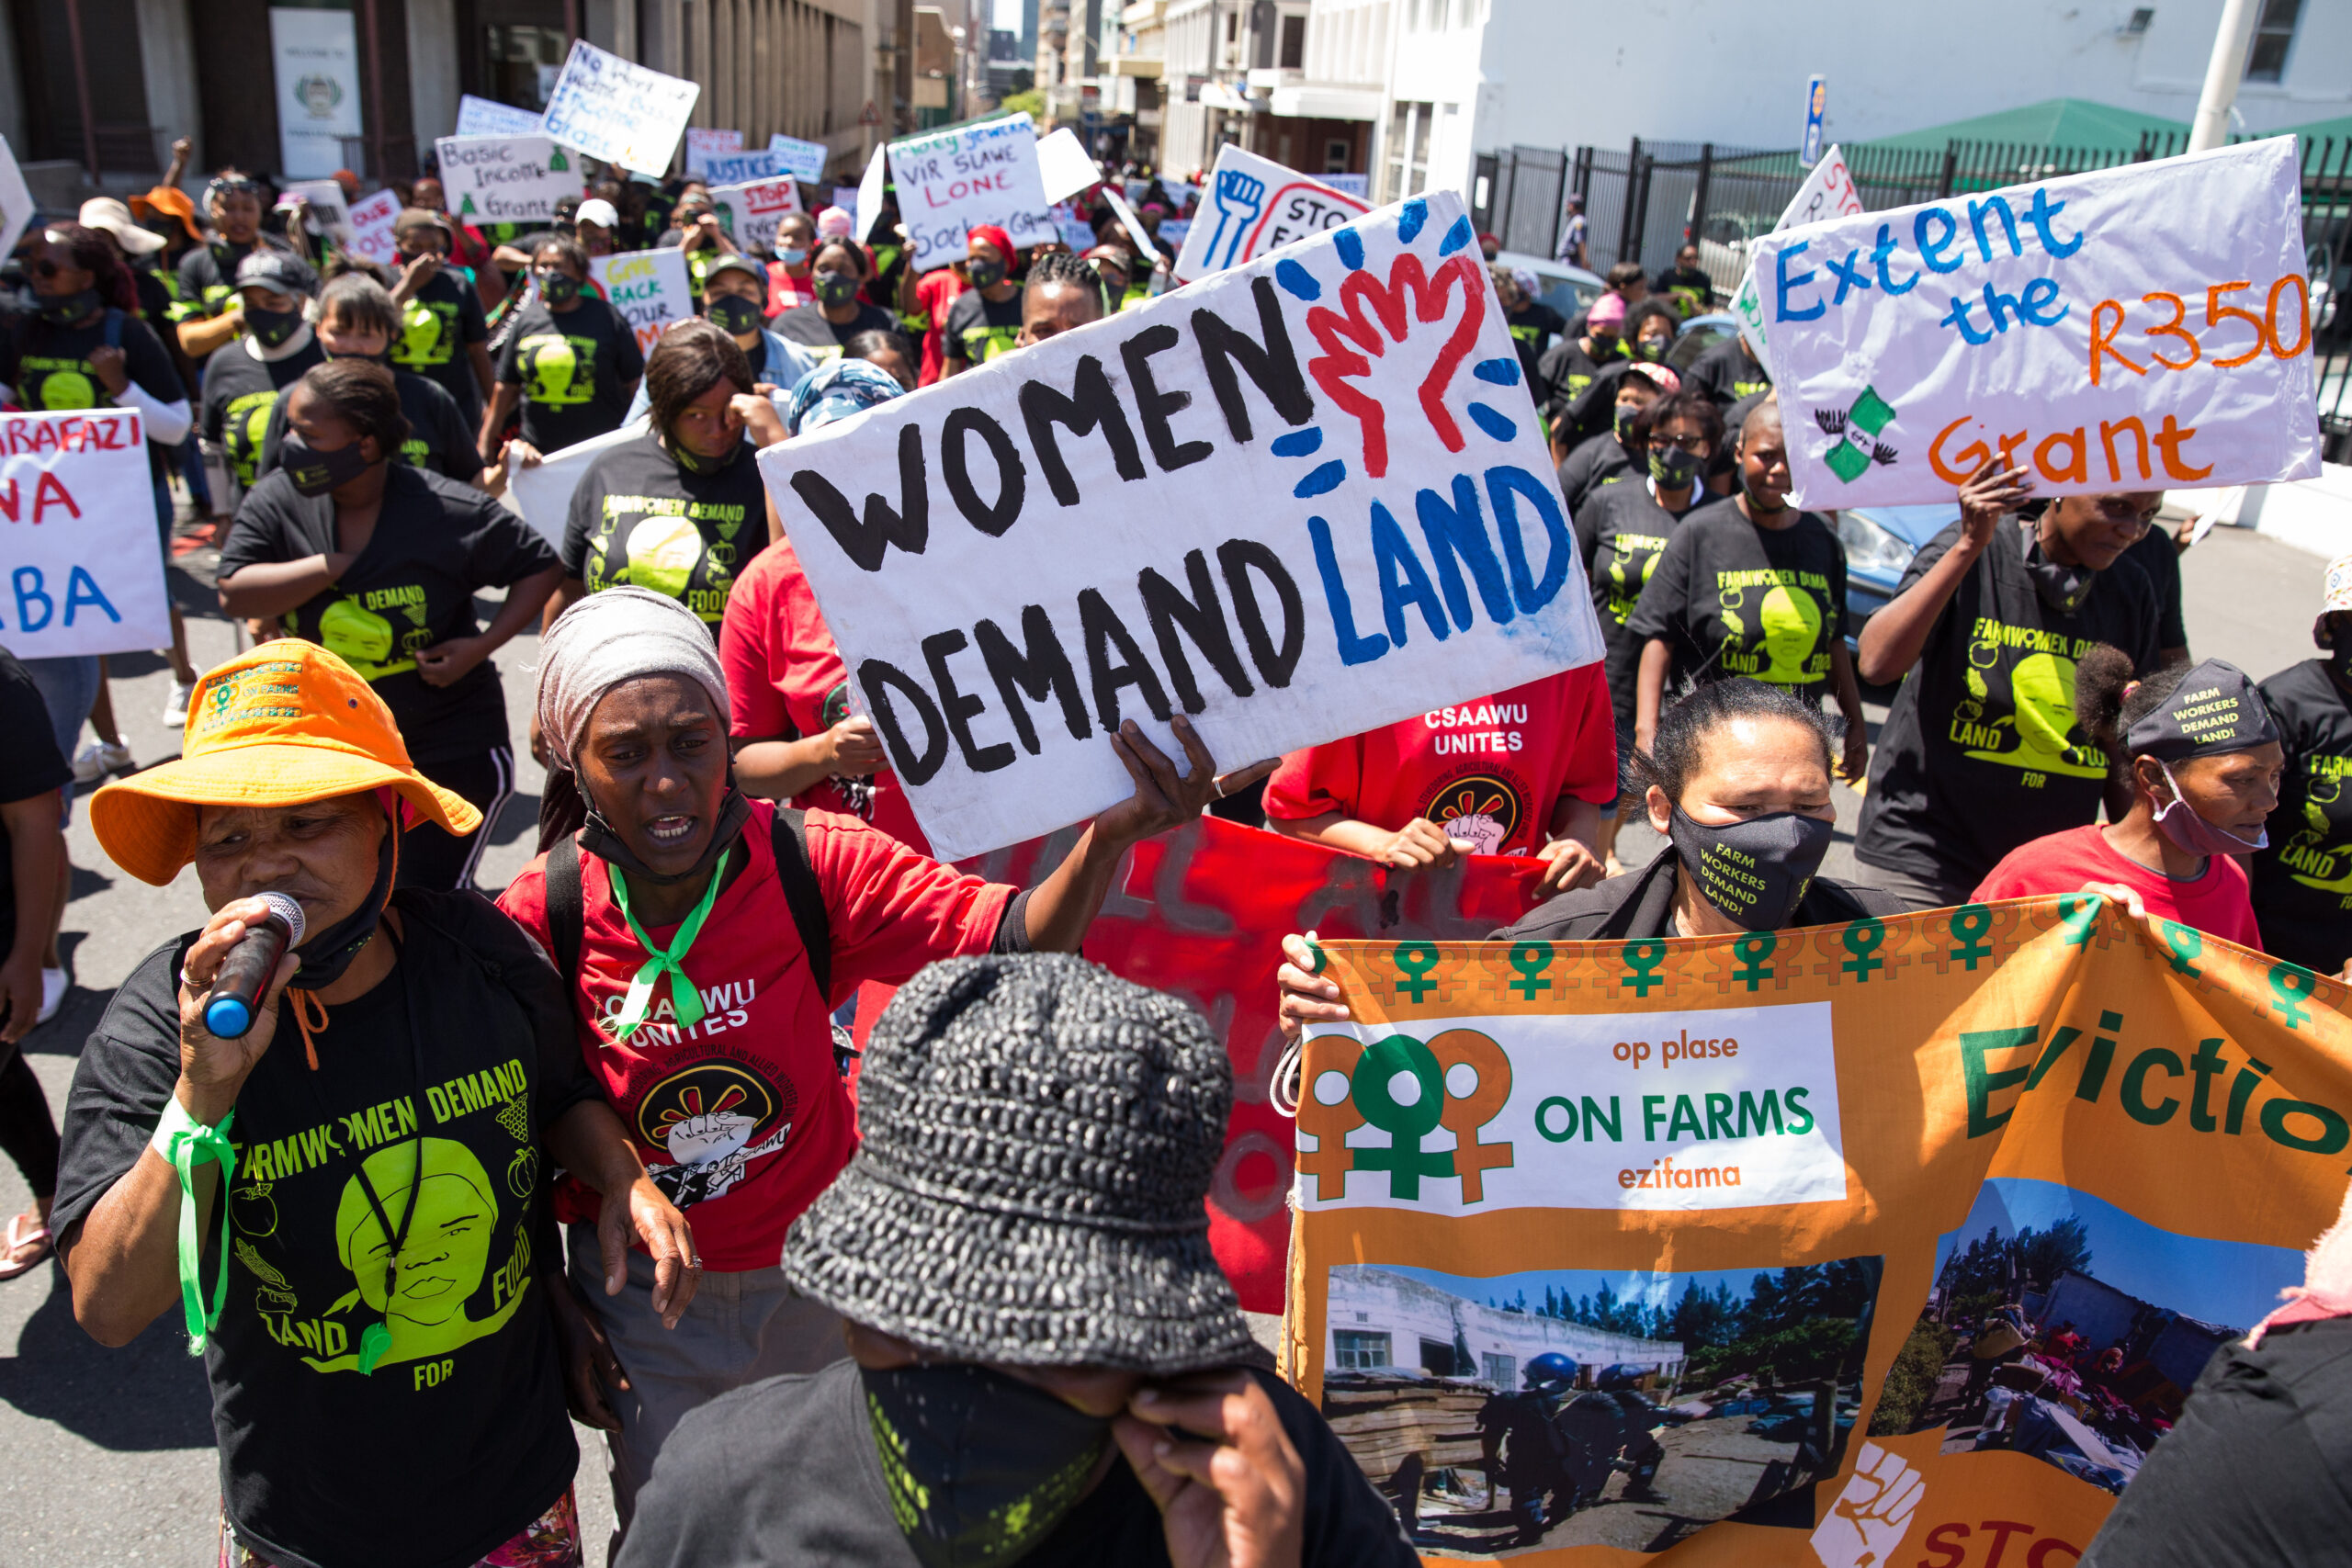 About 150 farm workers and supporters marched to Parliament to hand over a memorandum demanding an urgent meeting with Minister Thoko Didiza on farm women’s land issues and needs. The march was held to mark International Rural Women’s Day and and World Food Day. Photos: Ashraf Hendricks